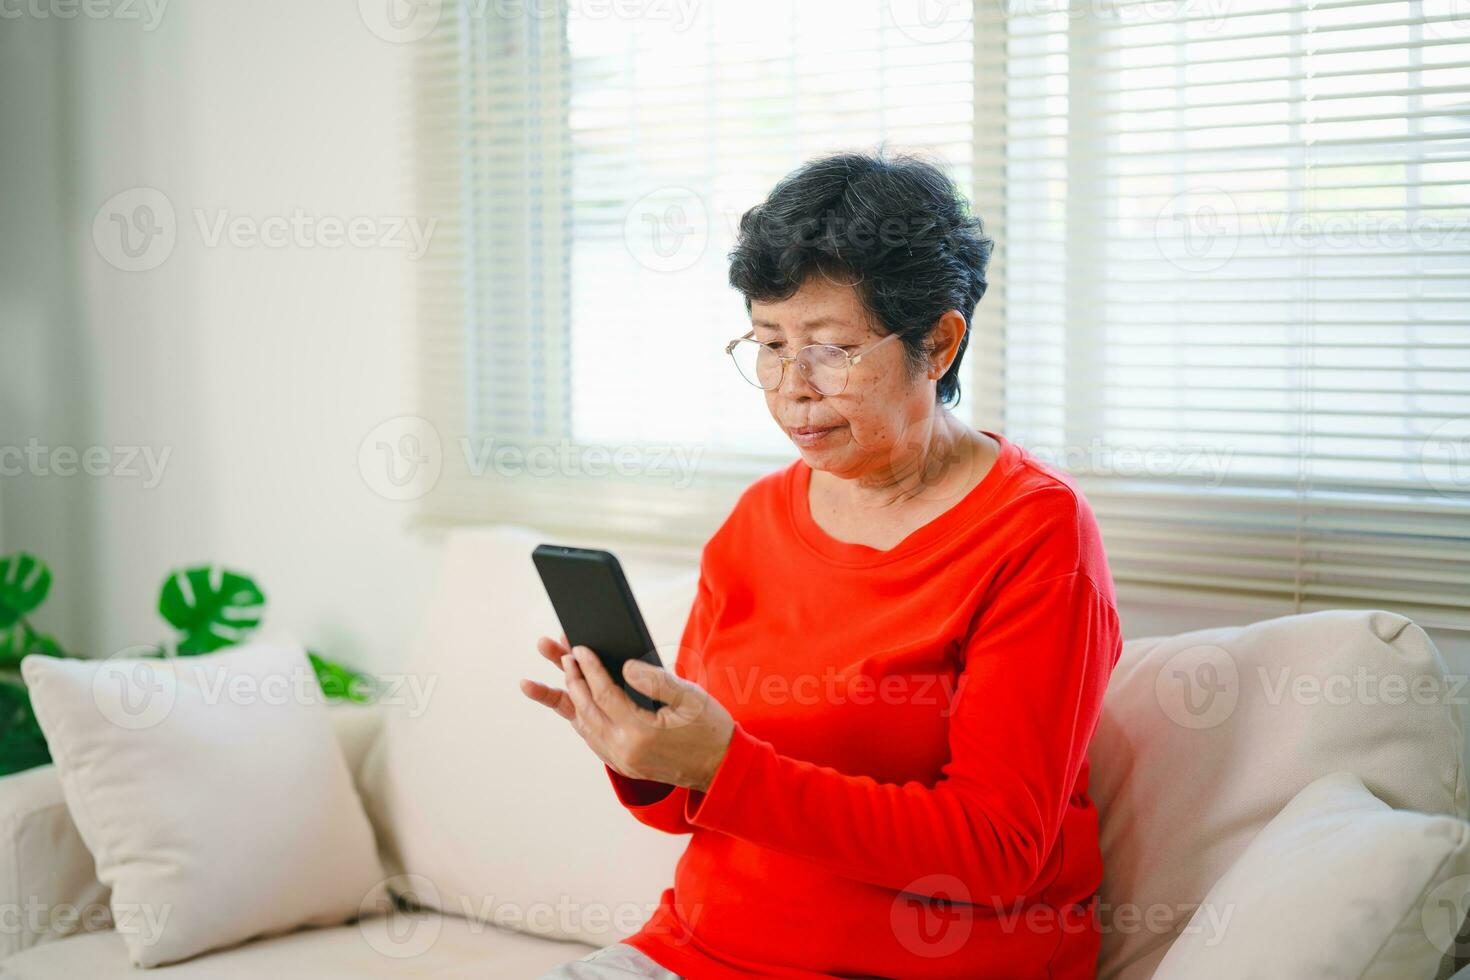 Happy senior old asian woman enjoying using mobile apps texting typing messages sit on sofa, smiling old lady holding smartphone looking smartphone browsing social media or learning technology at home photo